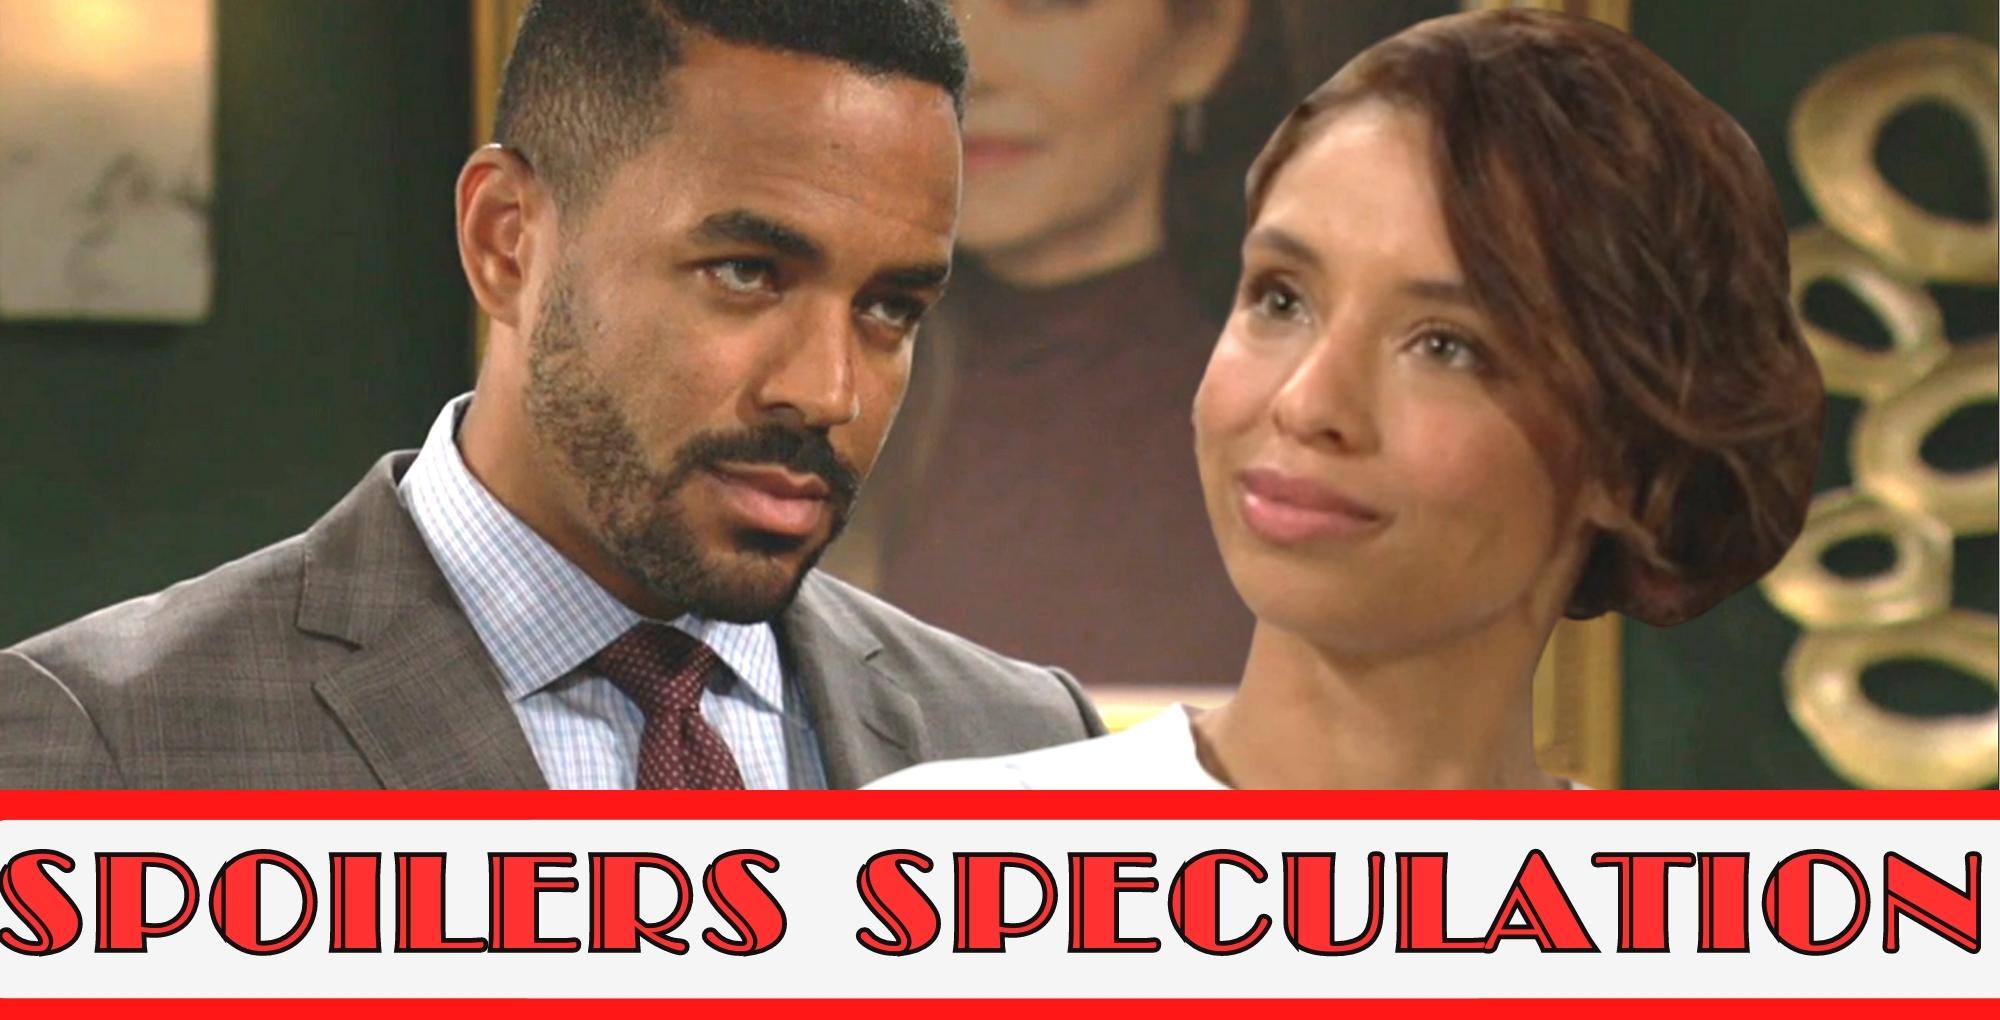 y&r spoilers speculation about nate hastings and elena dawson.